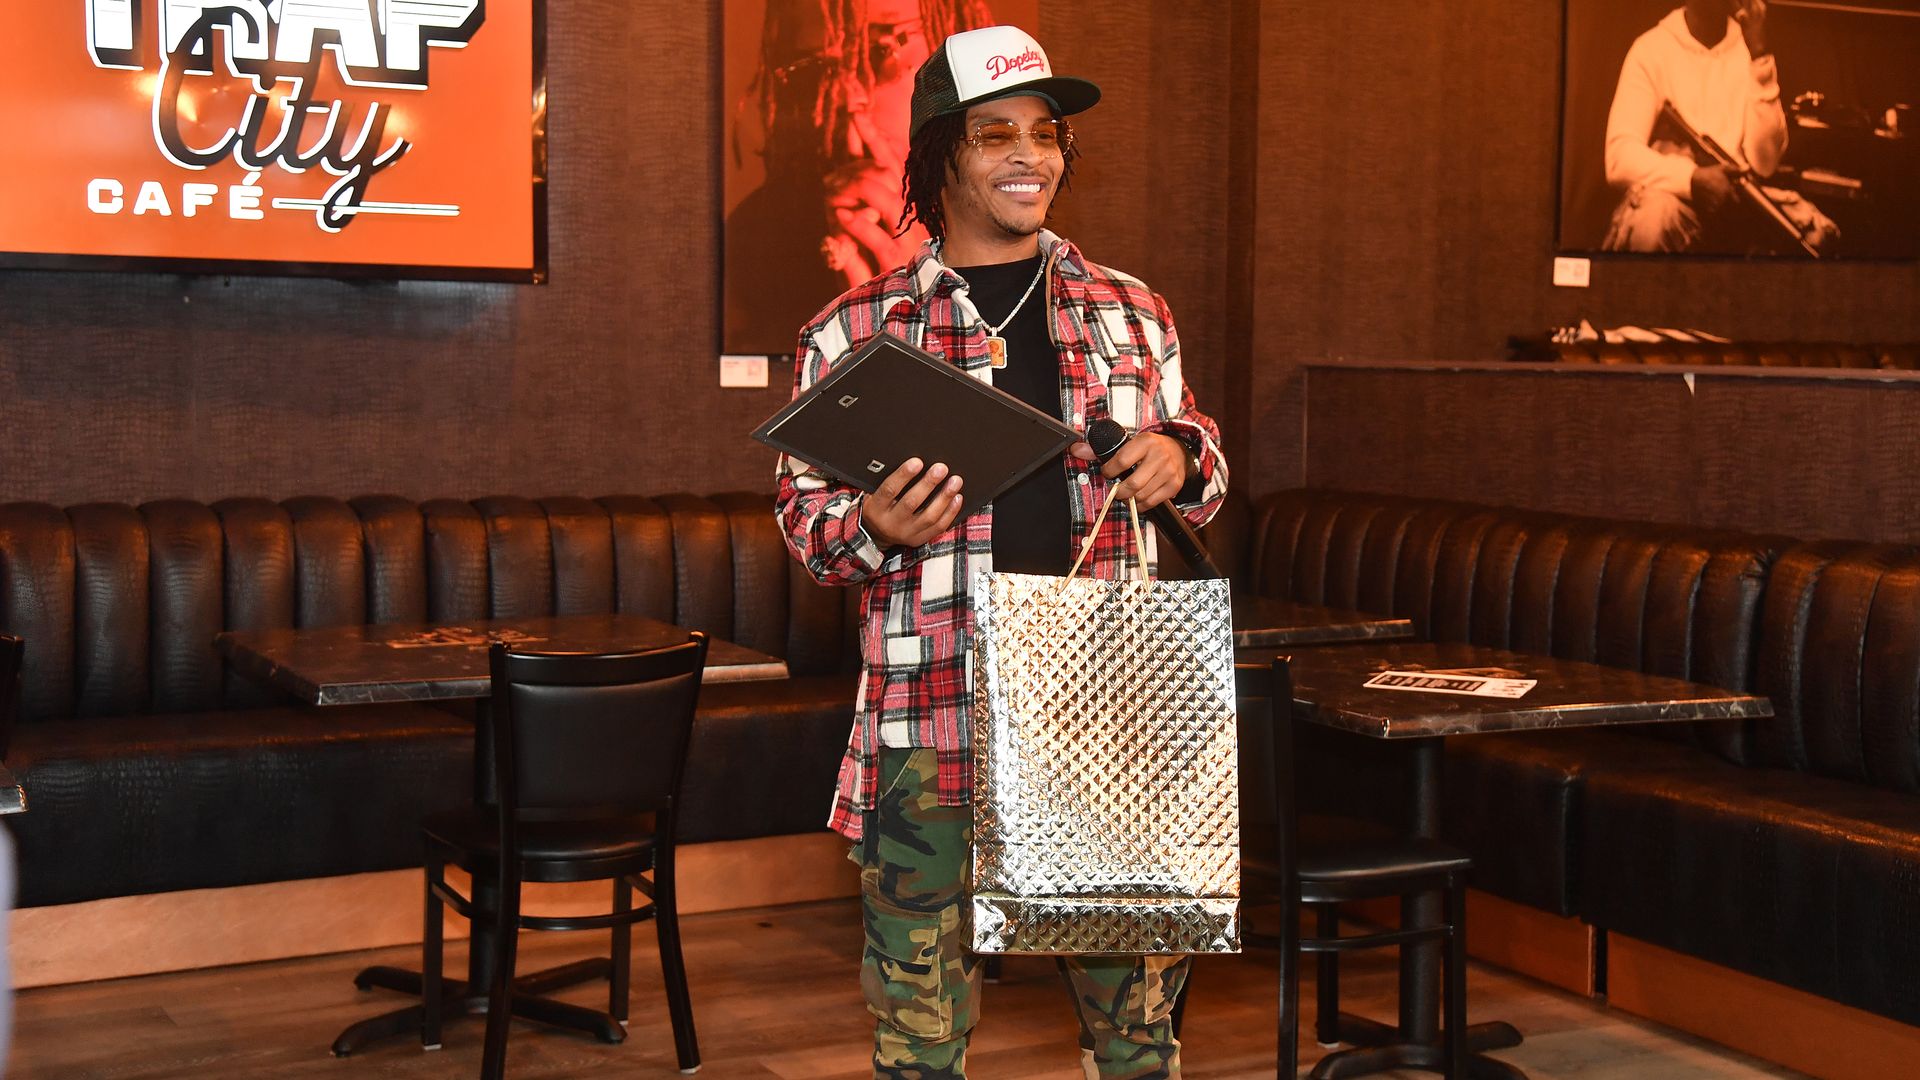 The rapper T.I. hands out holiday gifts.